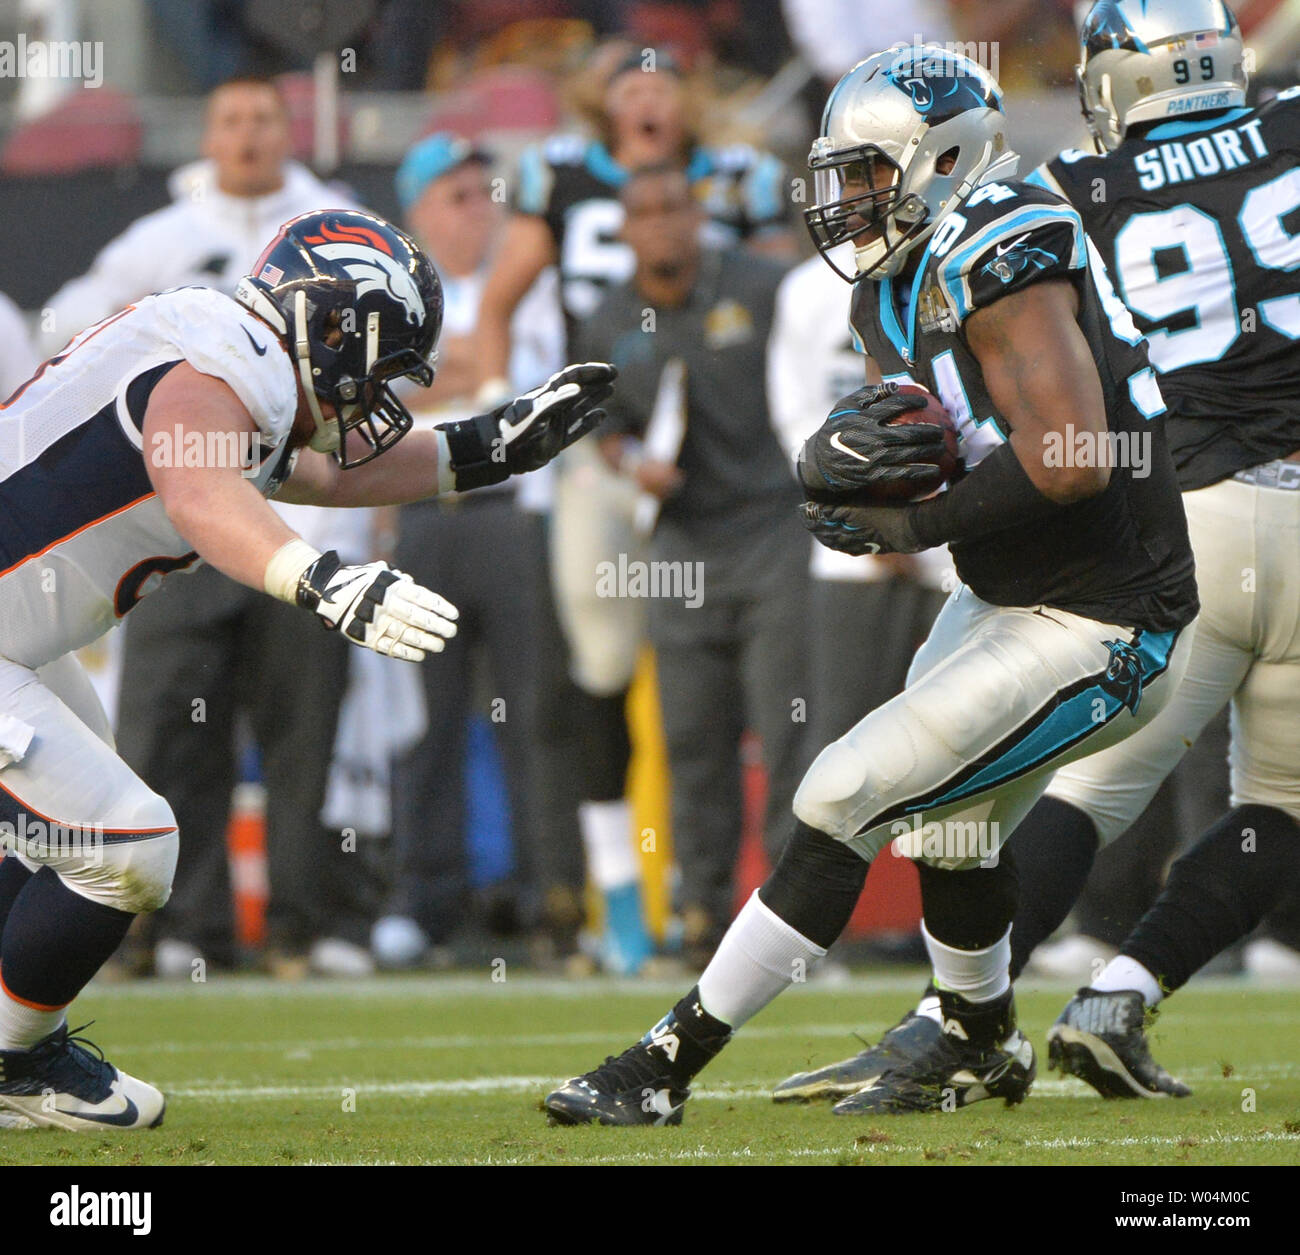 Carolina Panthers Kony Ealy (R) runs an intercepted pass from Denver Broncos Peyton Manning in the second quarter of Super Bowl 50 in Santa Clara, California on February 7, 2016.      Photo by Kevin Dietsch/UPI Stock Photo